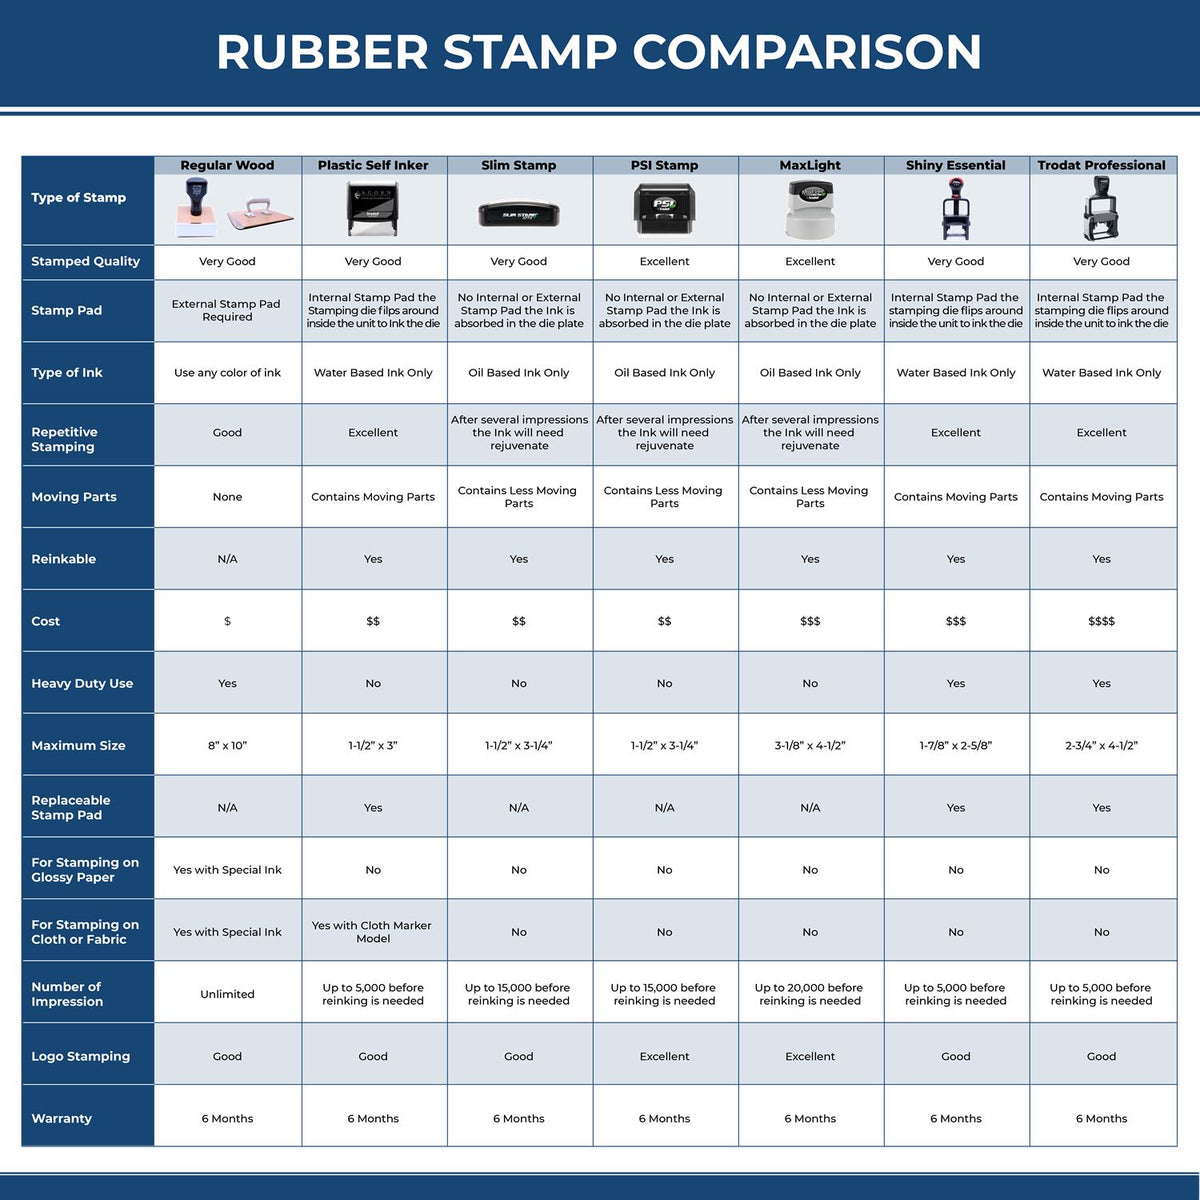 A comparison chart for the different types of mount models available for the Super Slim Kentucky Notary Public Stamp.